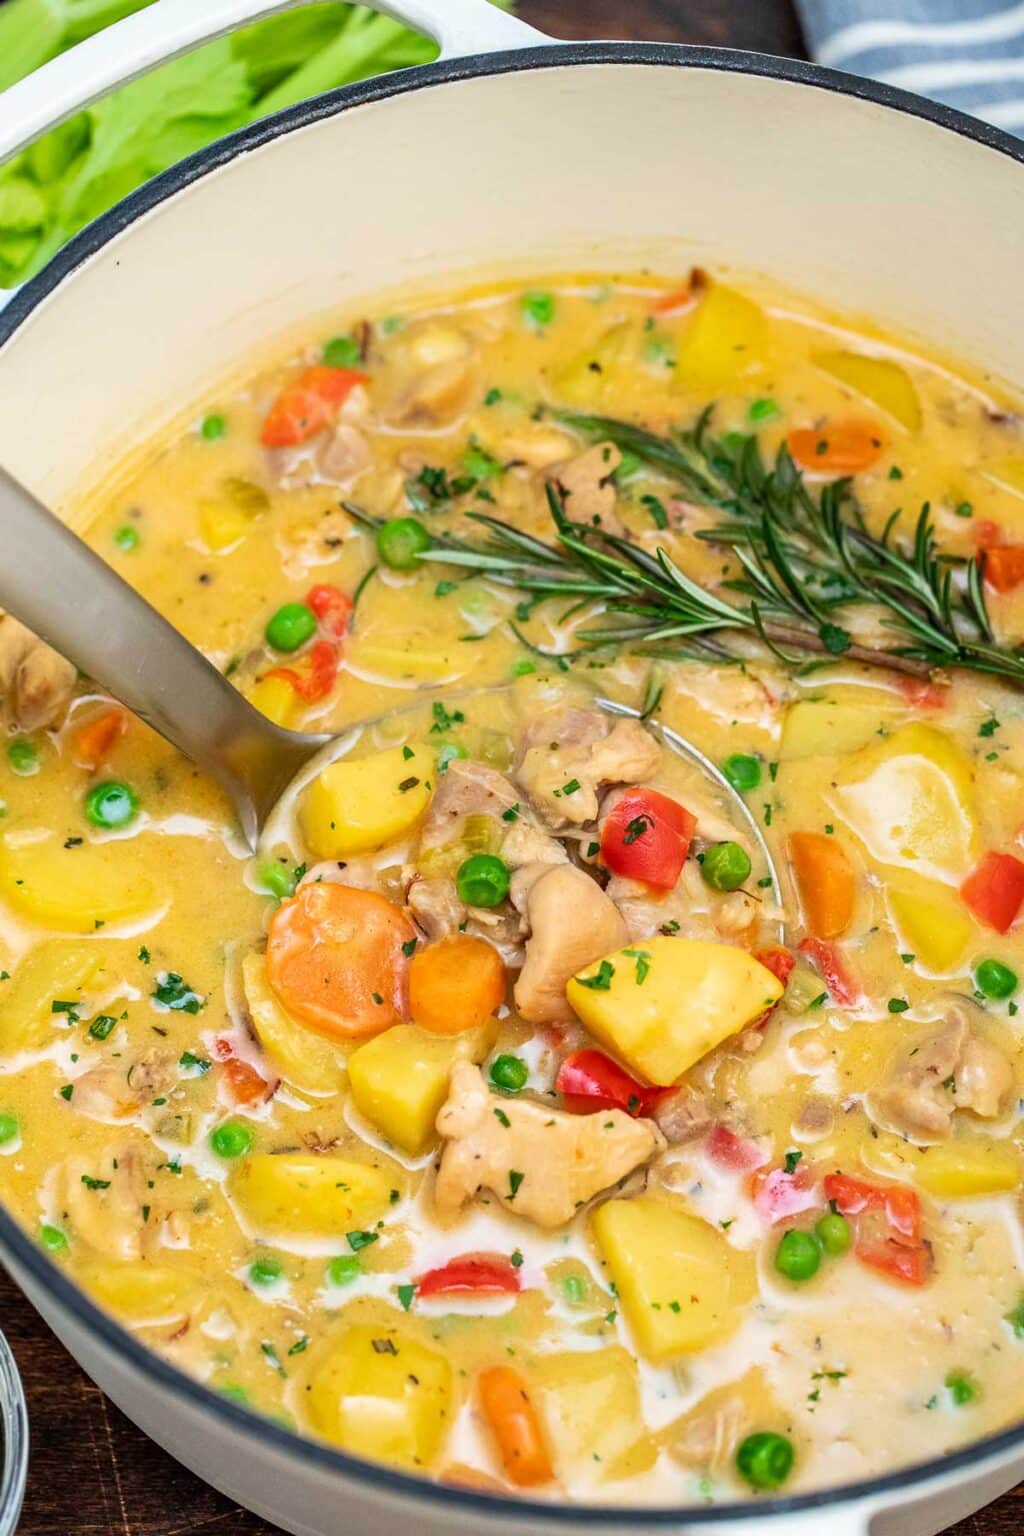 Chicken Stew Recipe [Video] - Sweet and Savory Meals